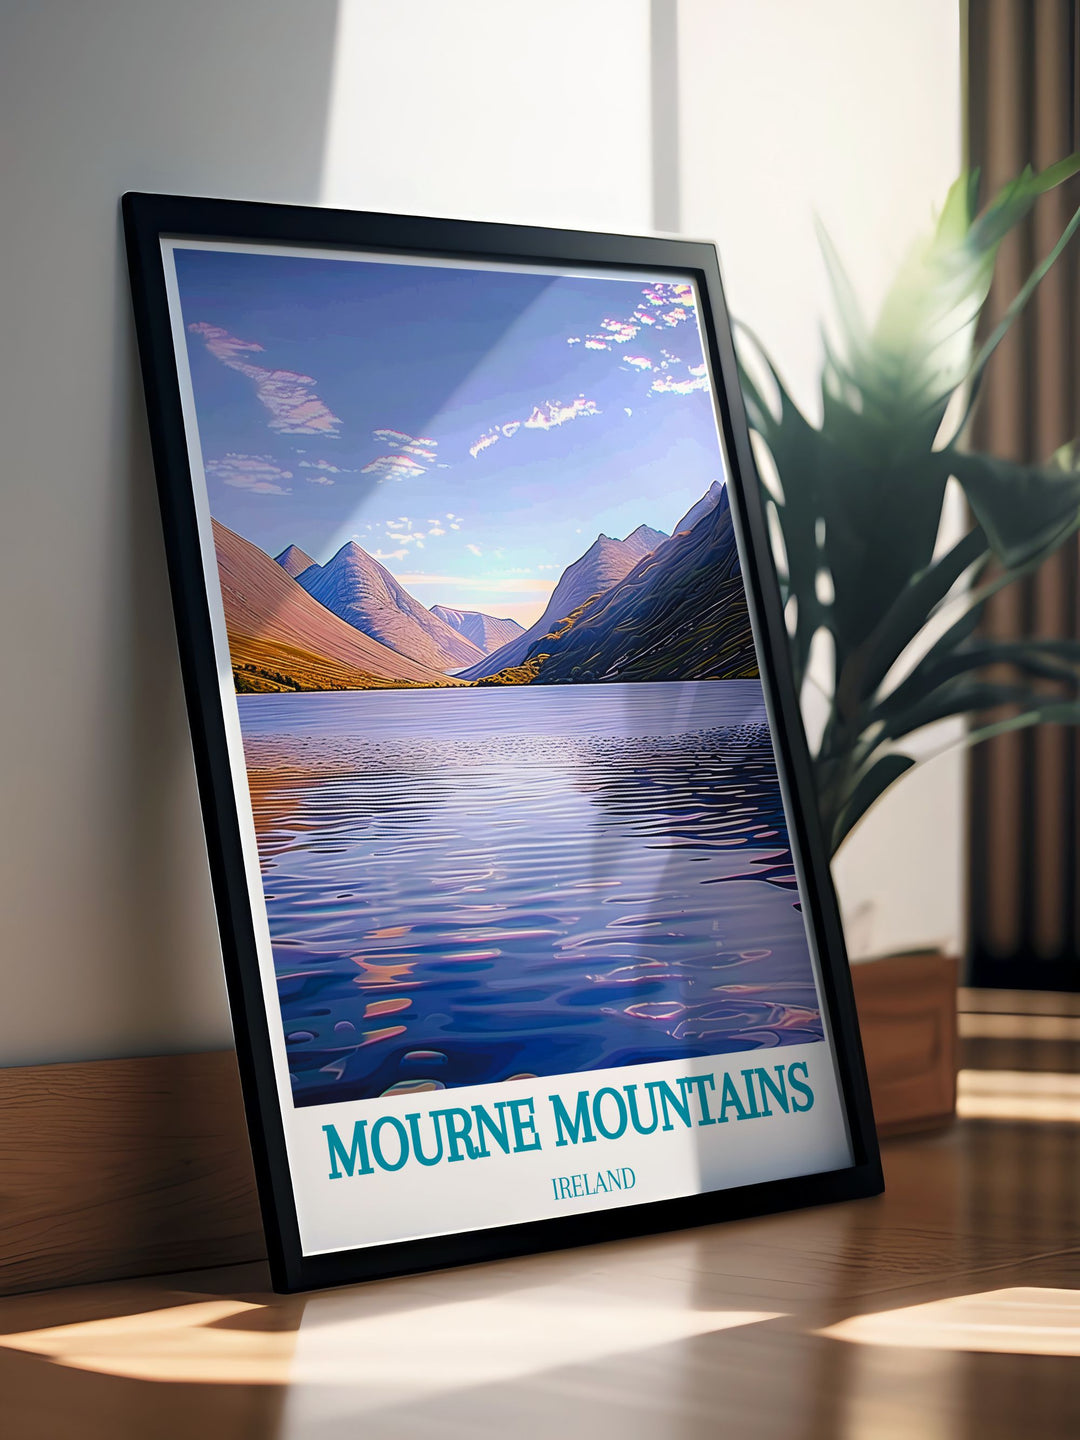 Featuring the scenic vistas of the Mourne Mountains, this poster offers a visual representation of one of Irelands most beautiful natural landmarks, ideal for those who cherish outdoor destinations.